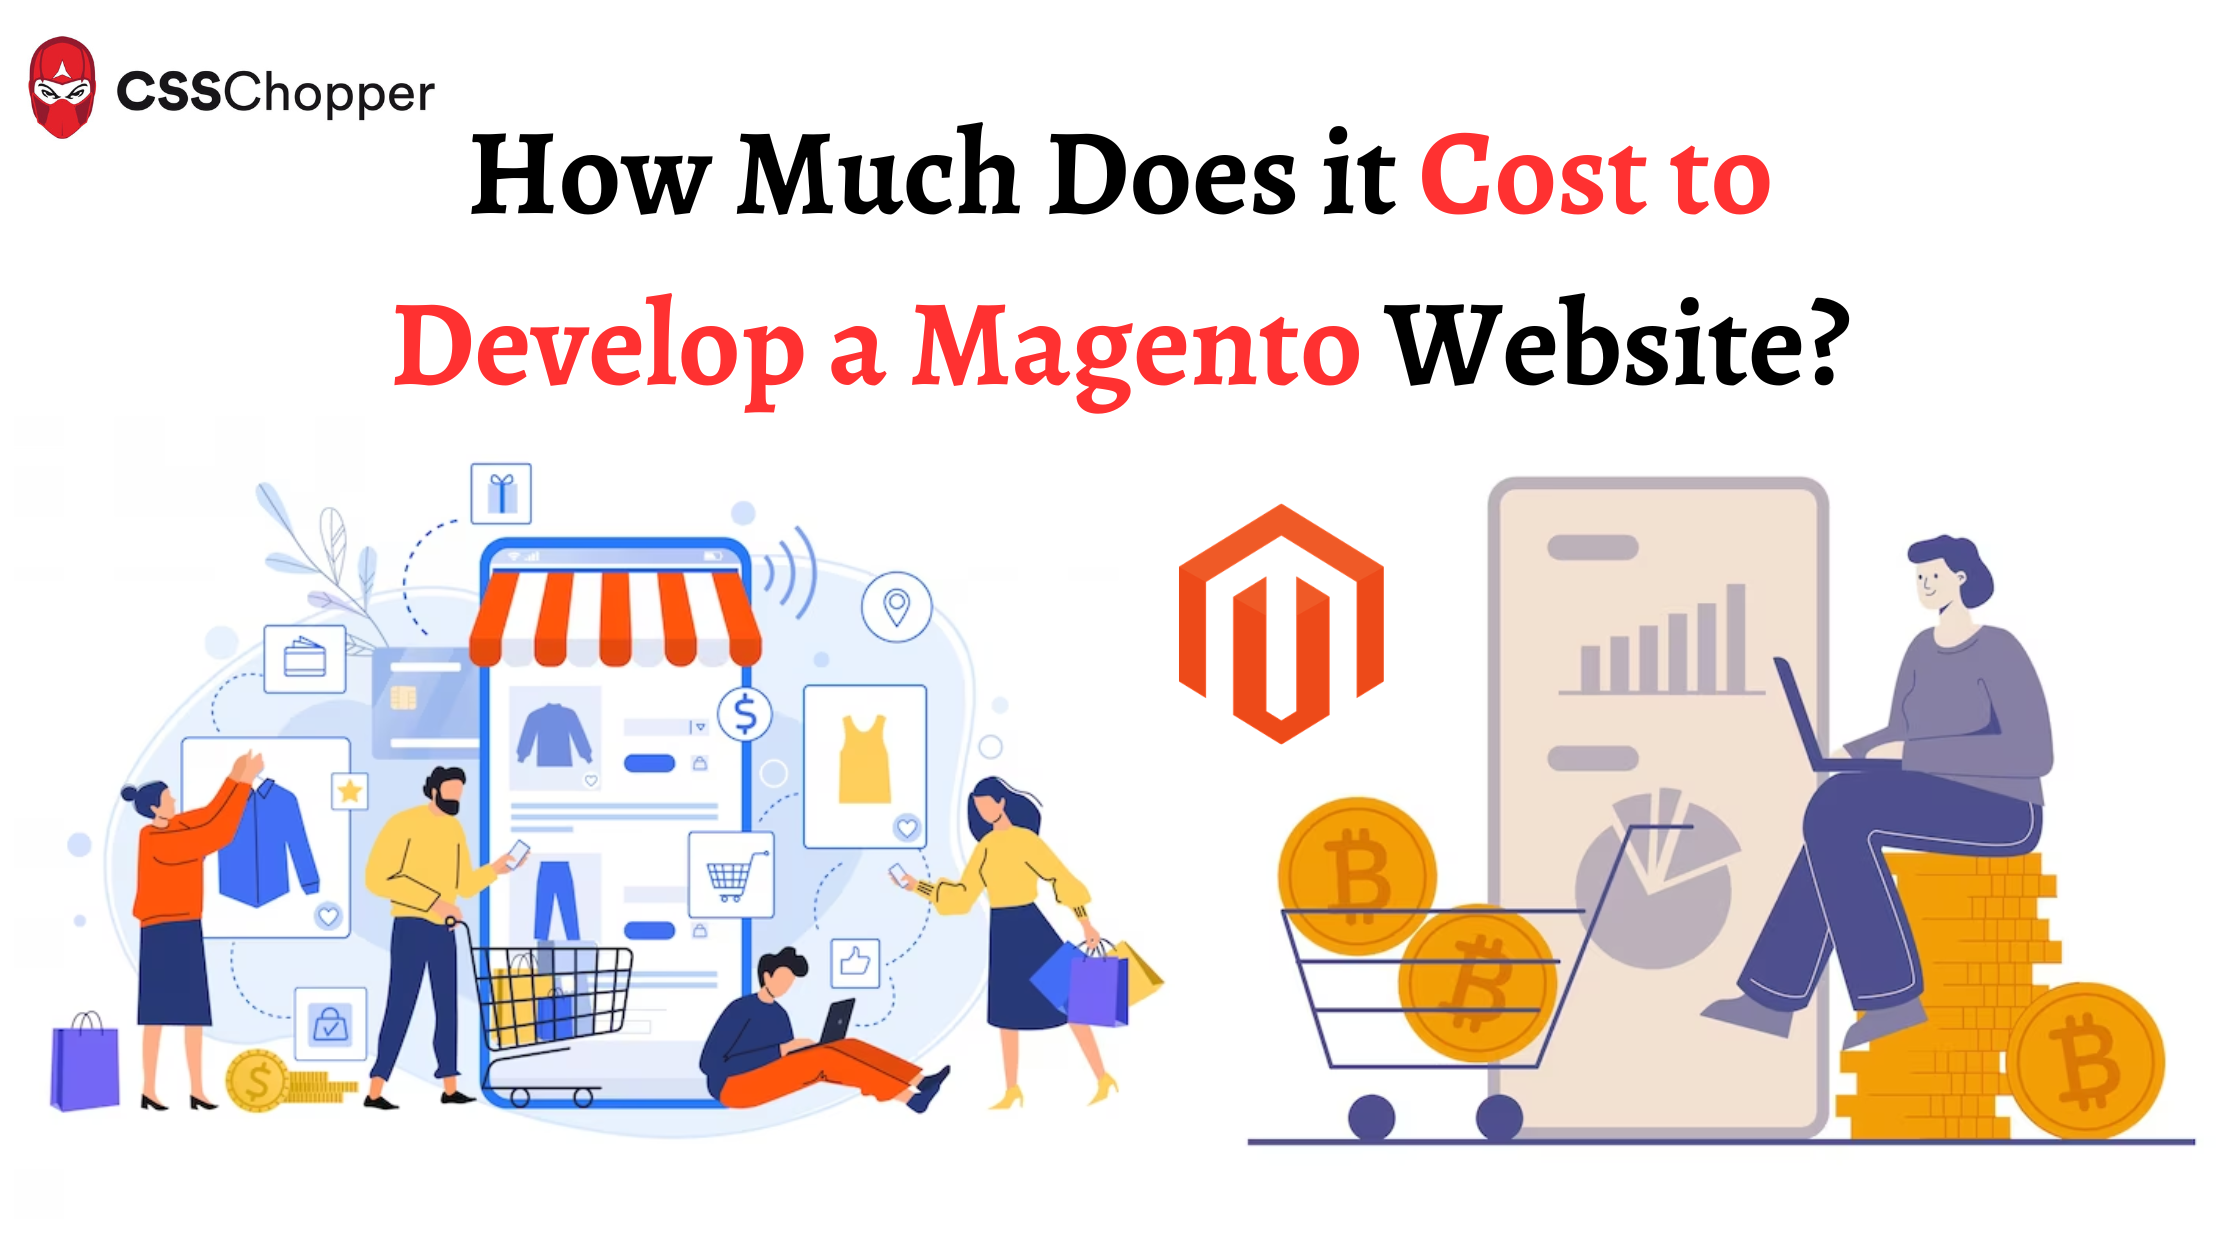 How Much Does it Cost to Develop a Magento Website?